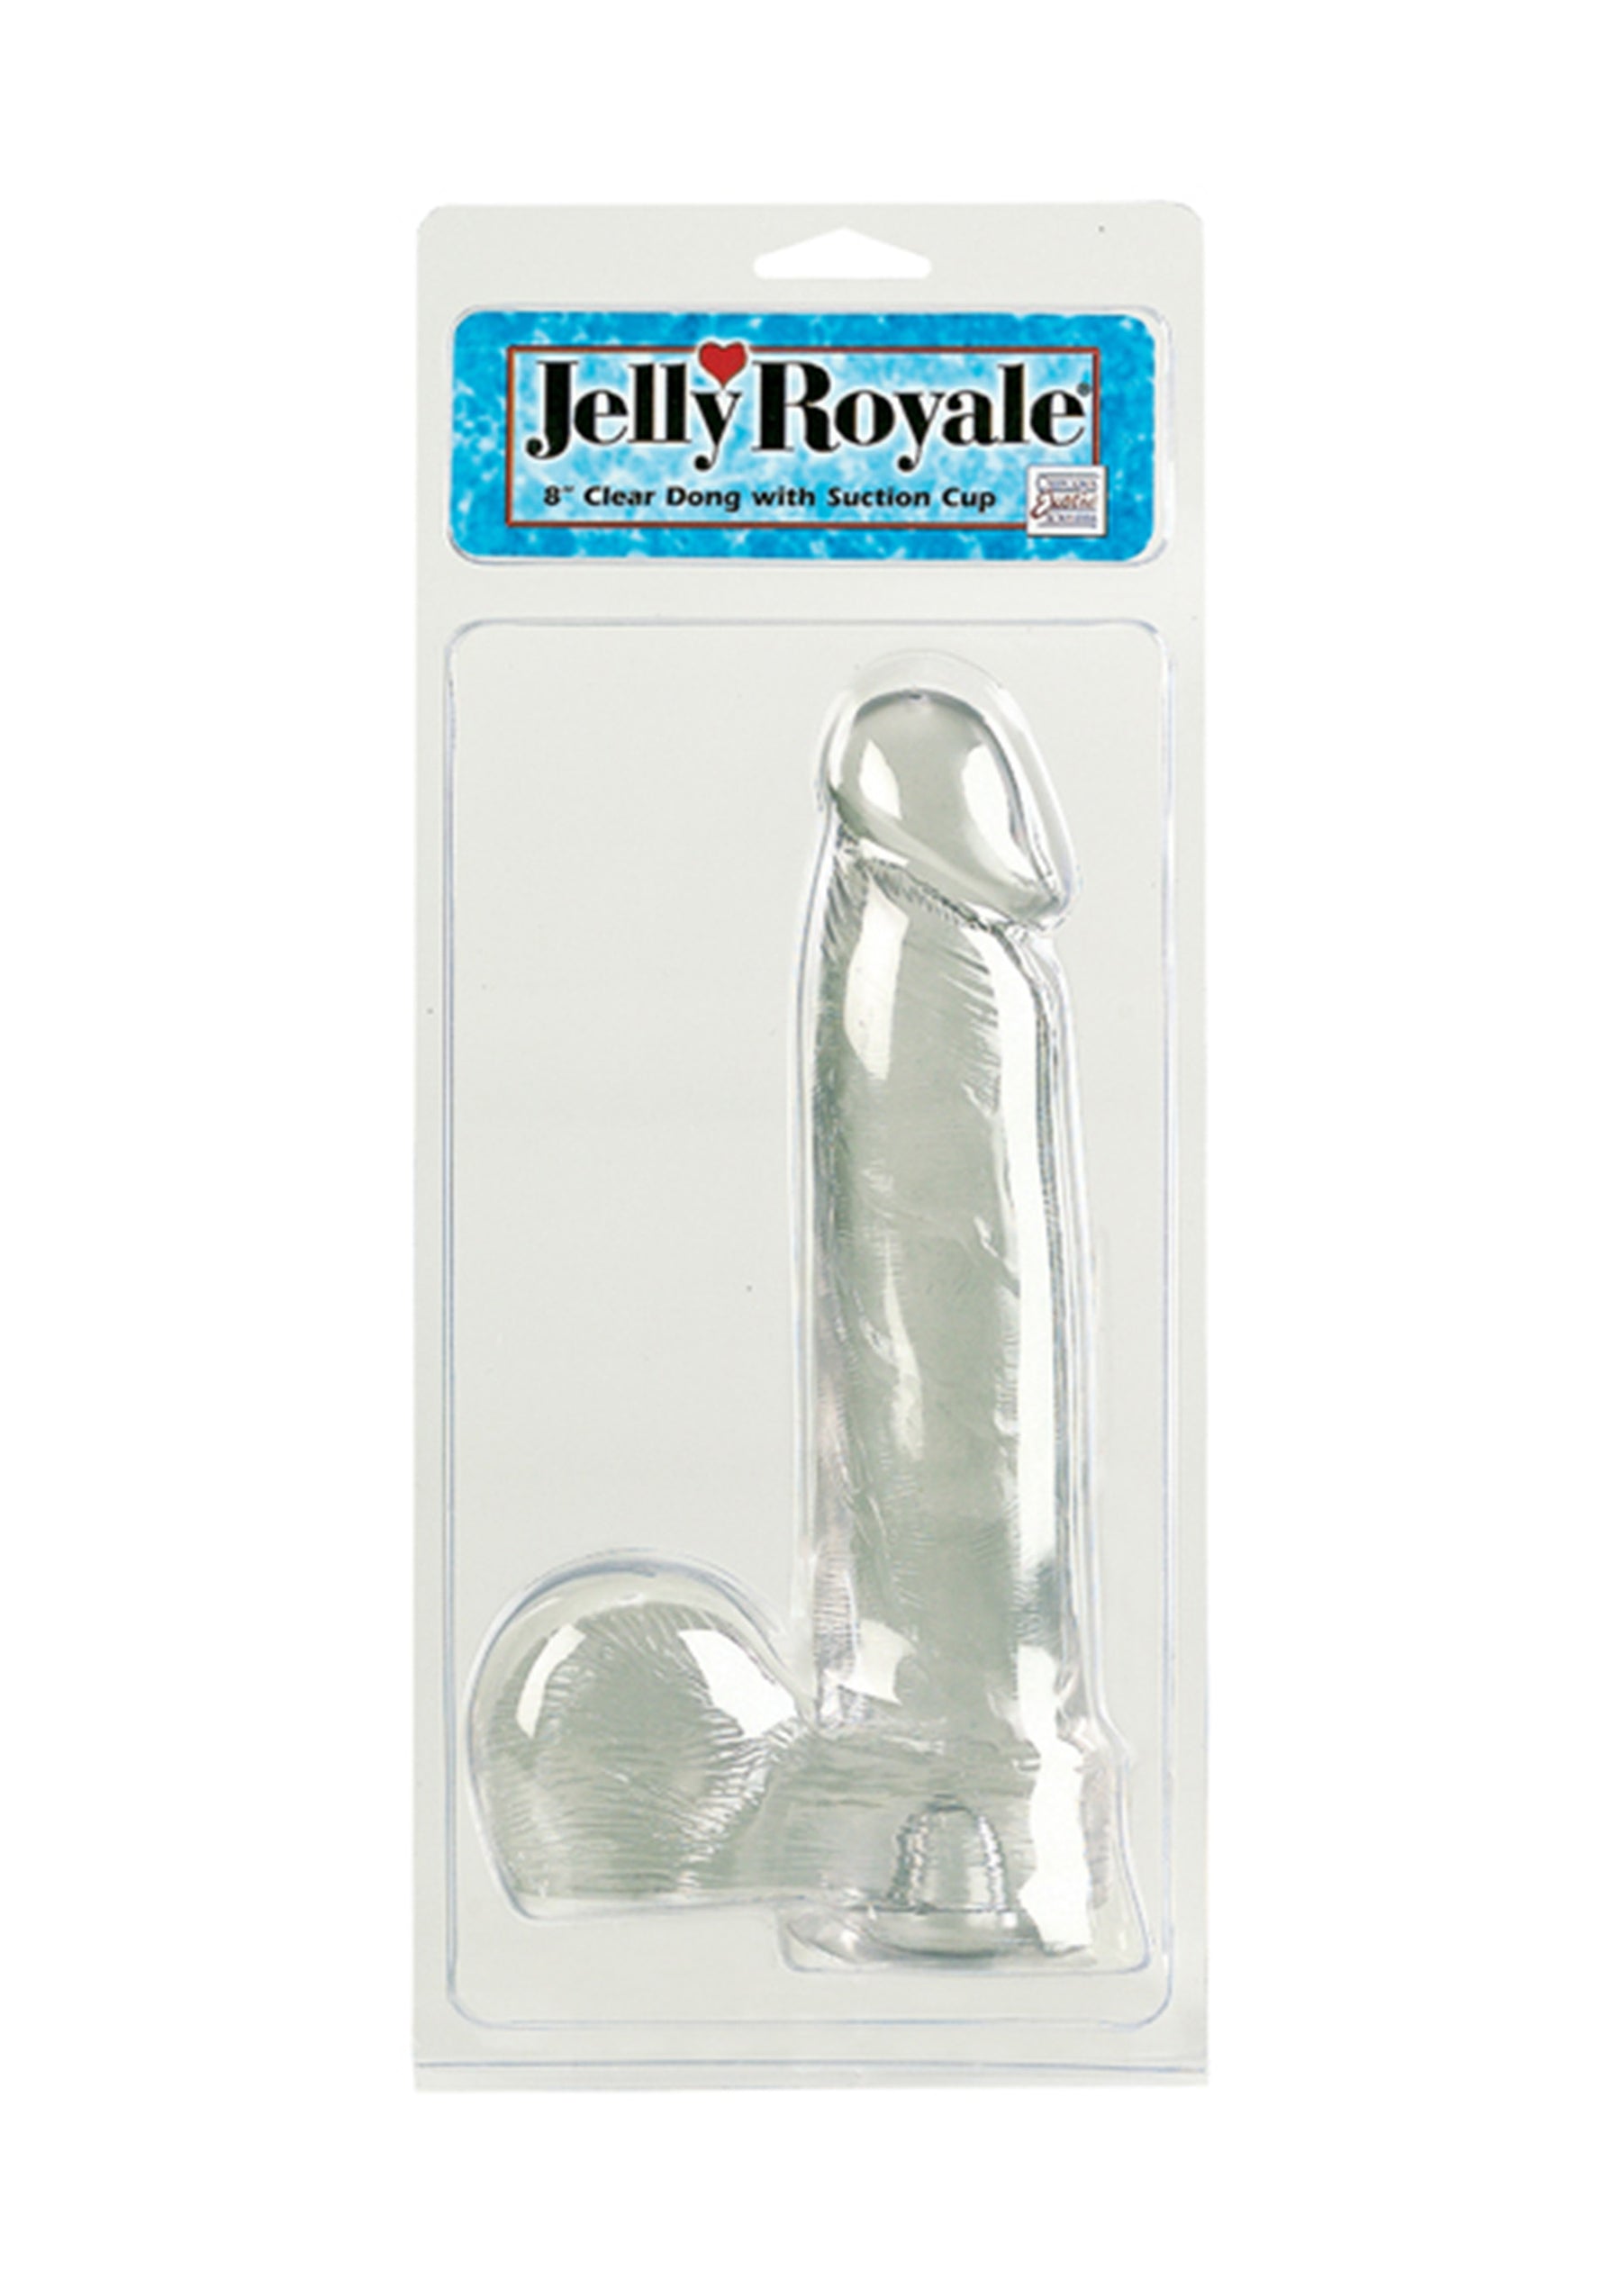 Jelly Royale 7.25 inch